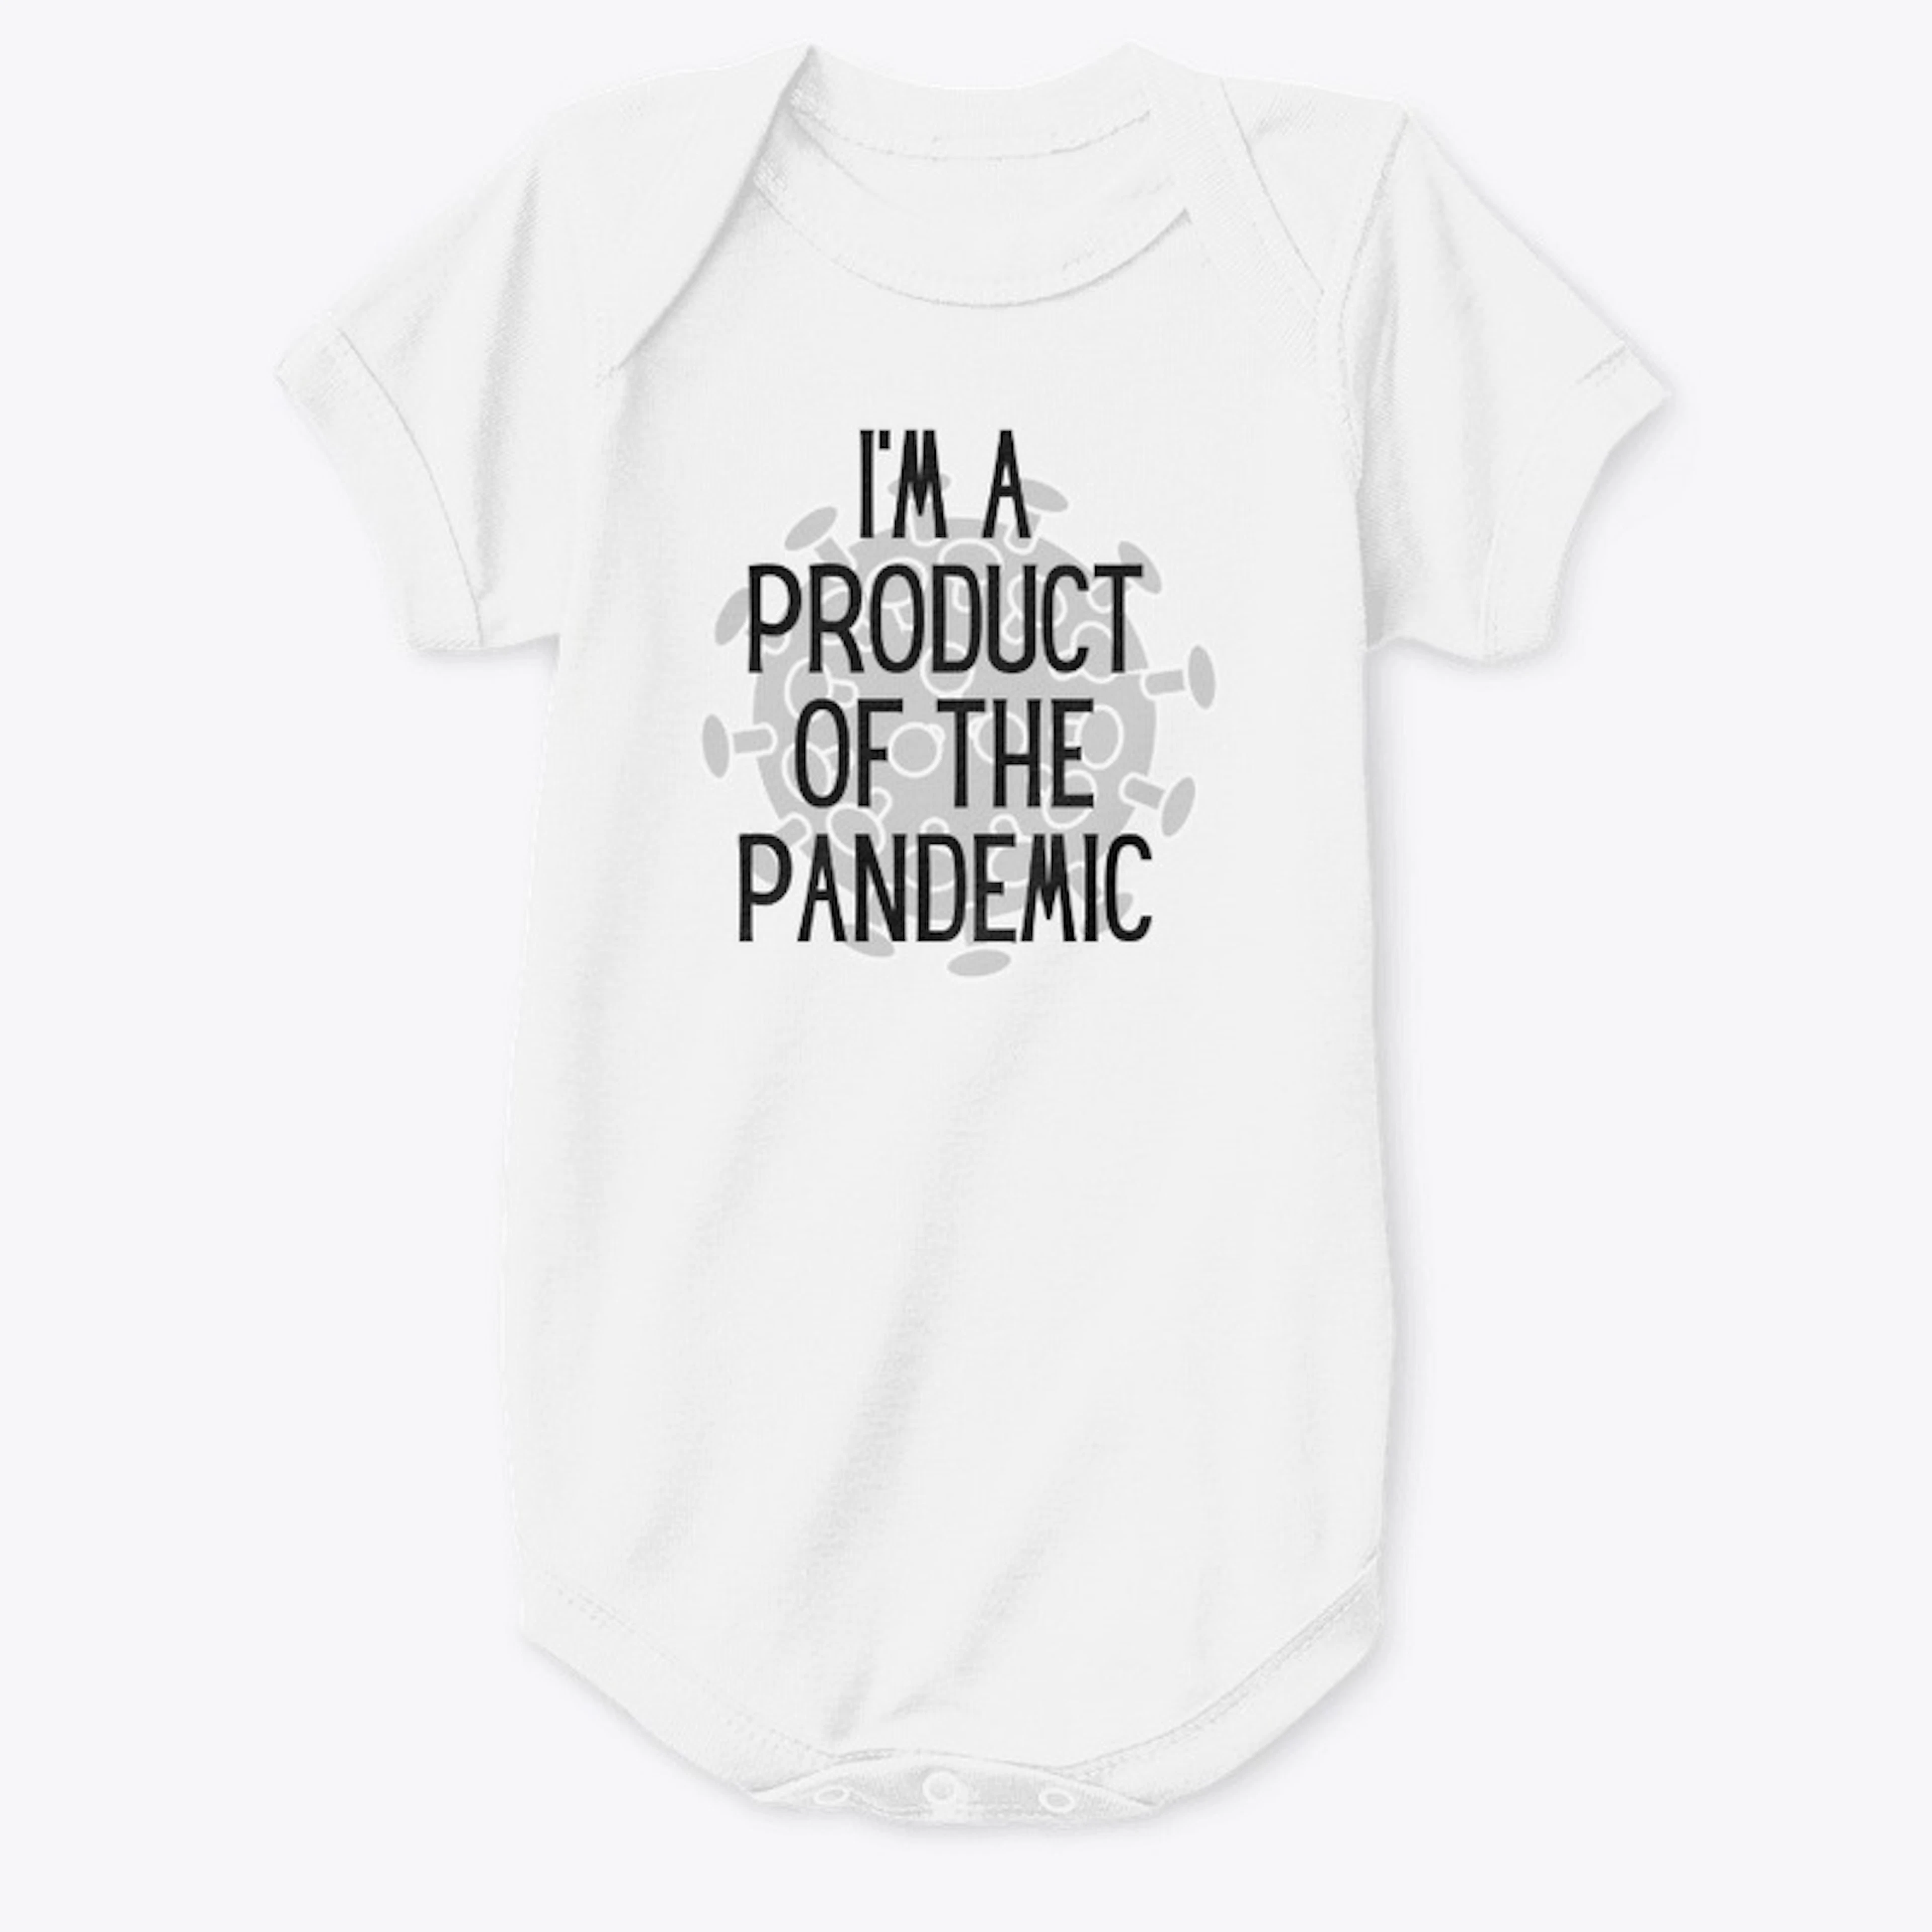 Product of the Pandemic